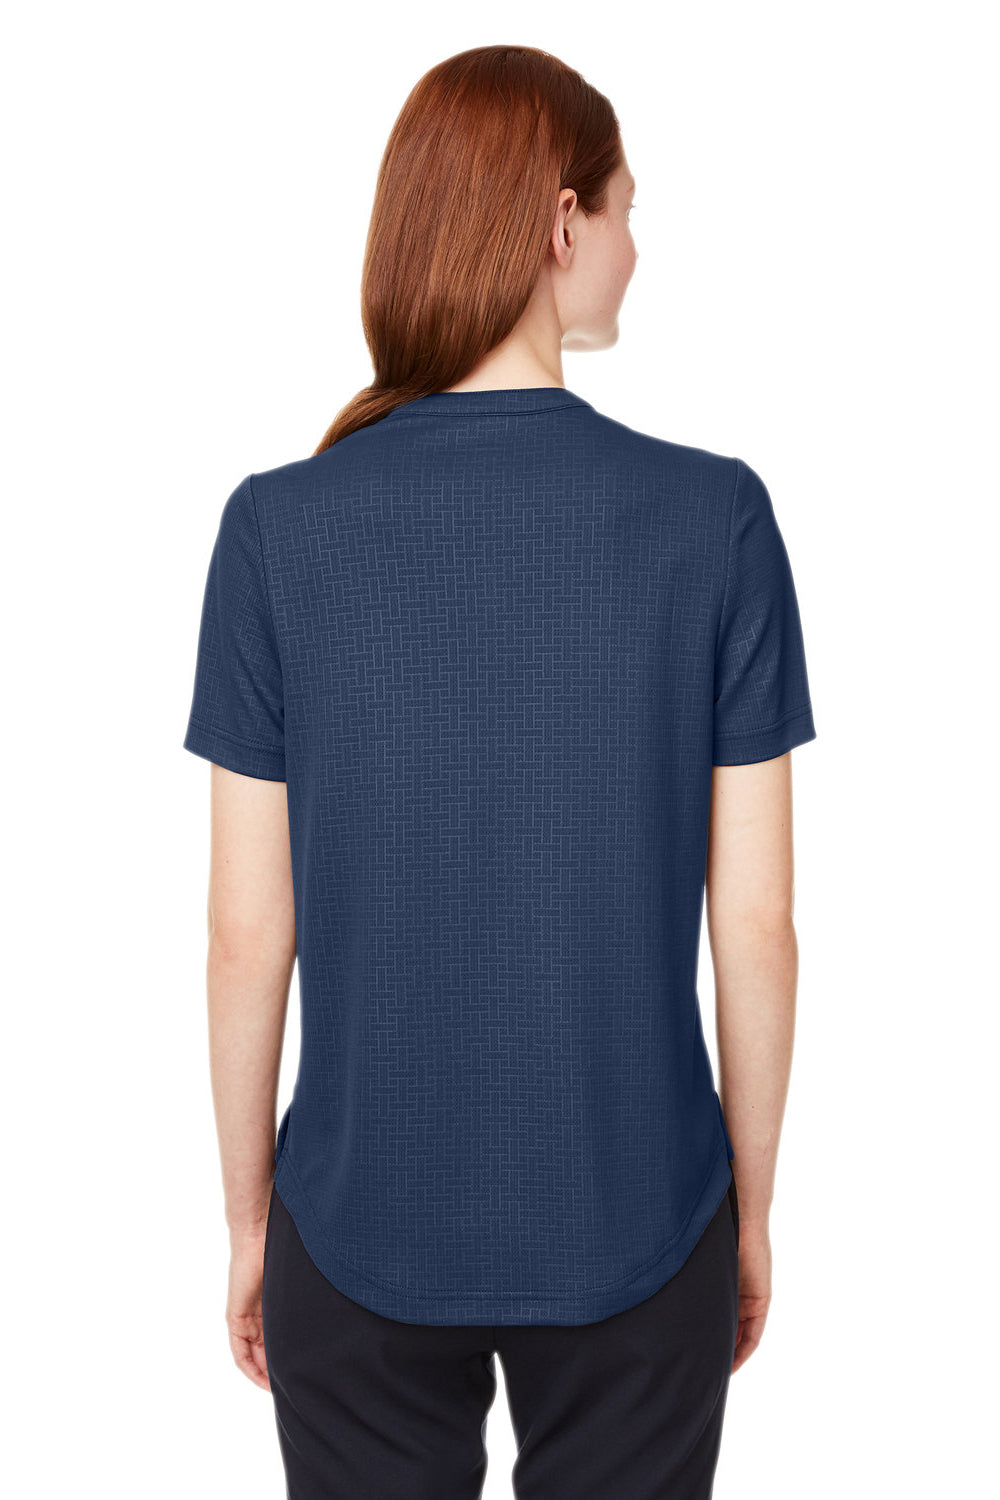 North End NE102W Womens Replay Recycled Short Sleeve Polo Shirt Classic Navy Blue Back